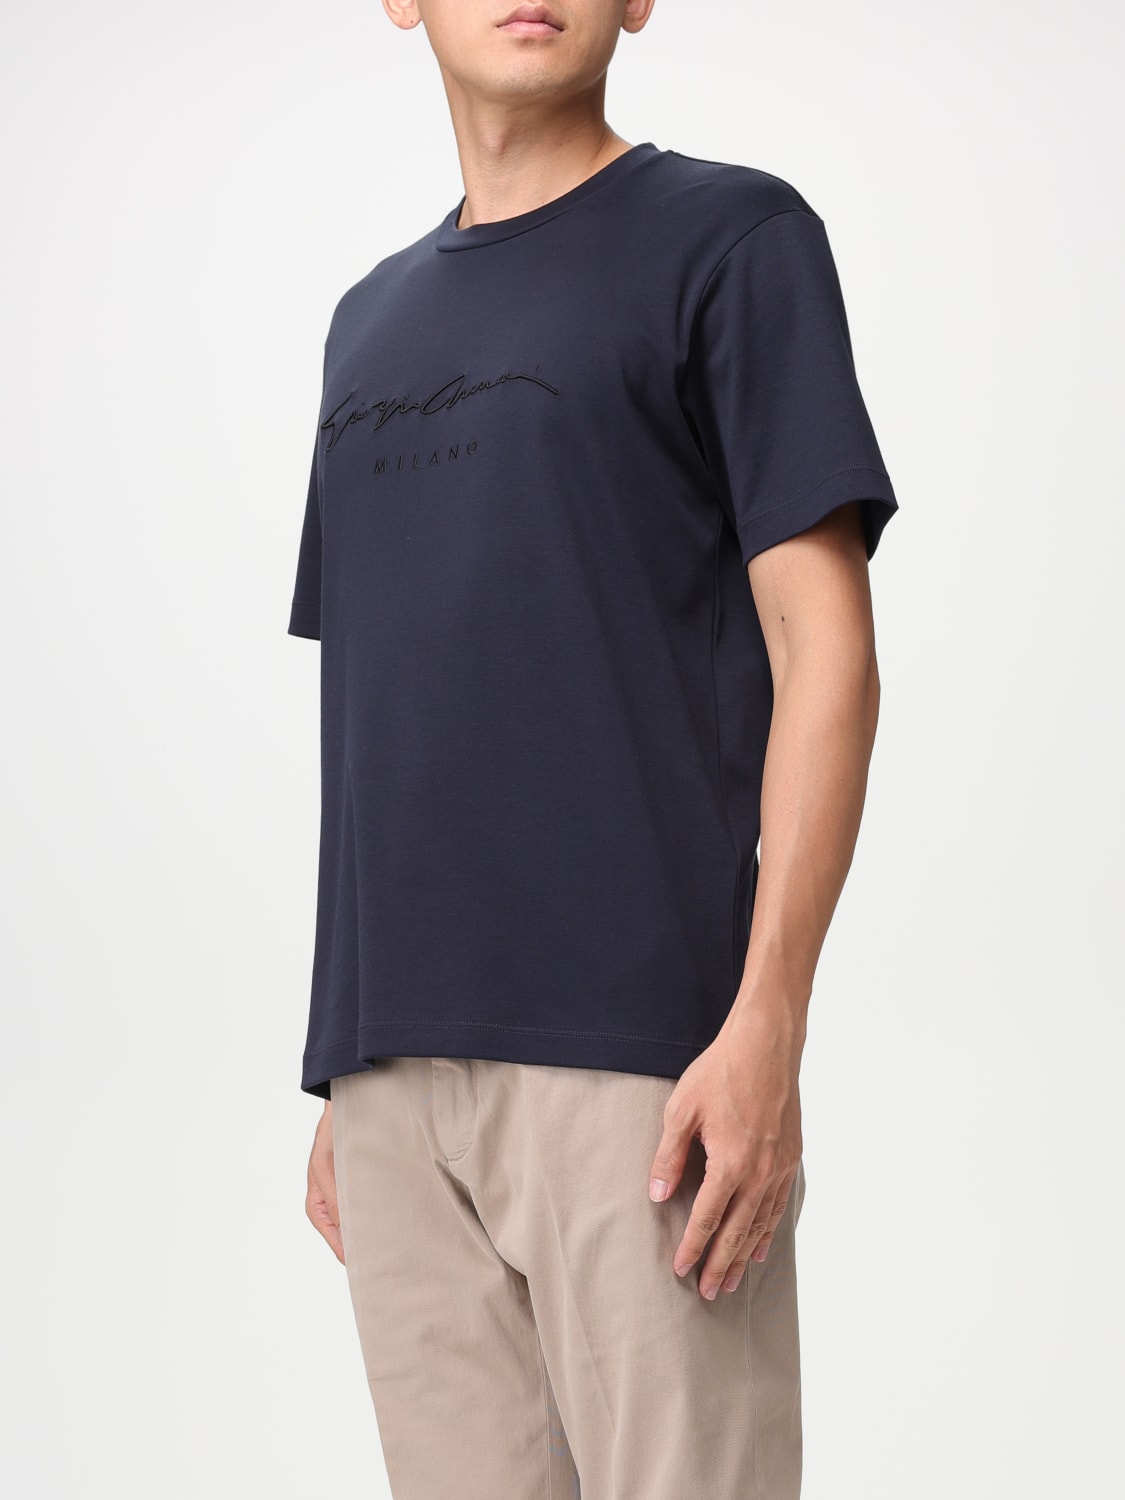 Giorgio Armani T-shirt With Logo in Blue for Men